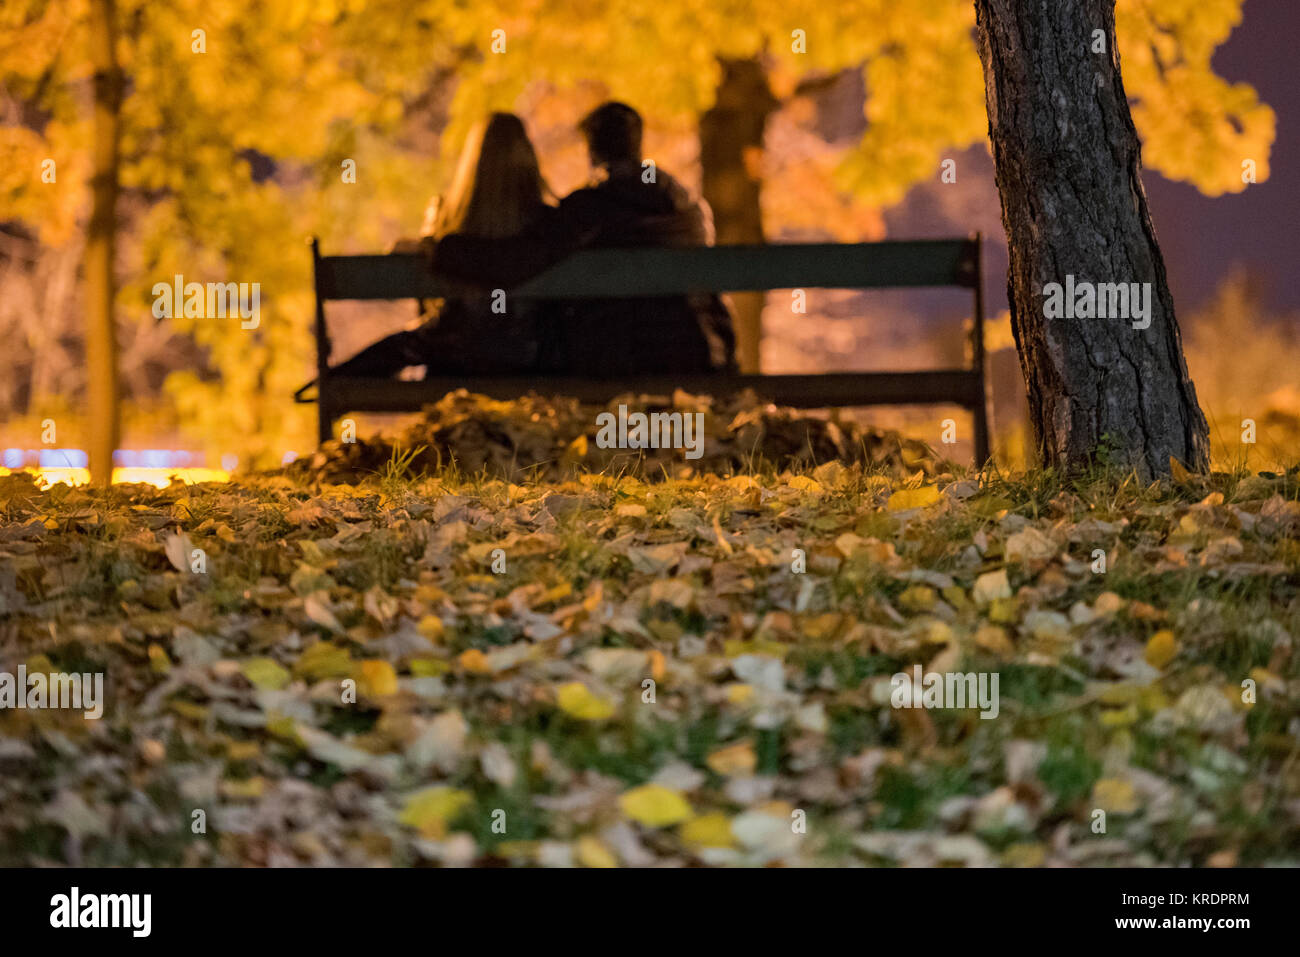 Couple on a bench in an autumn evening Stock Photo